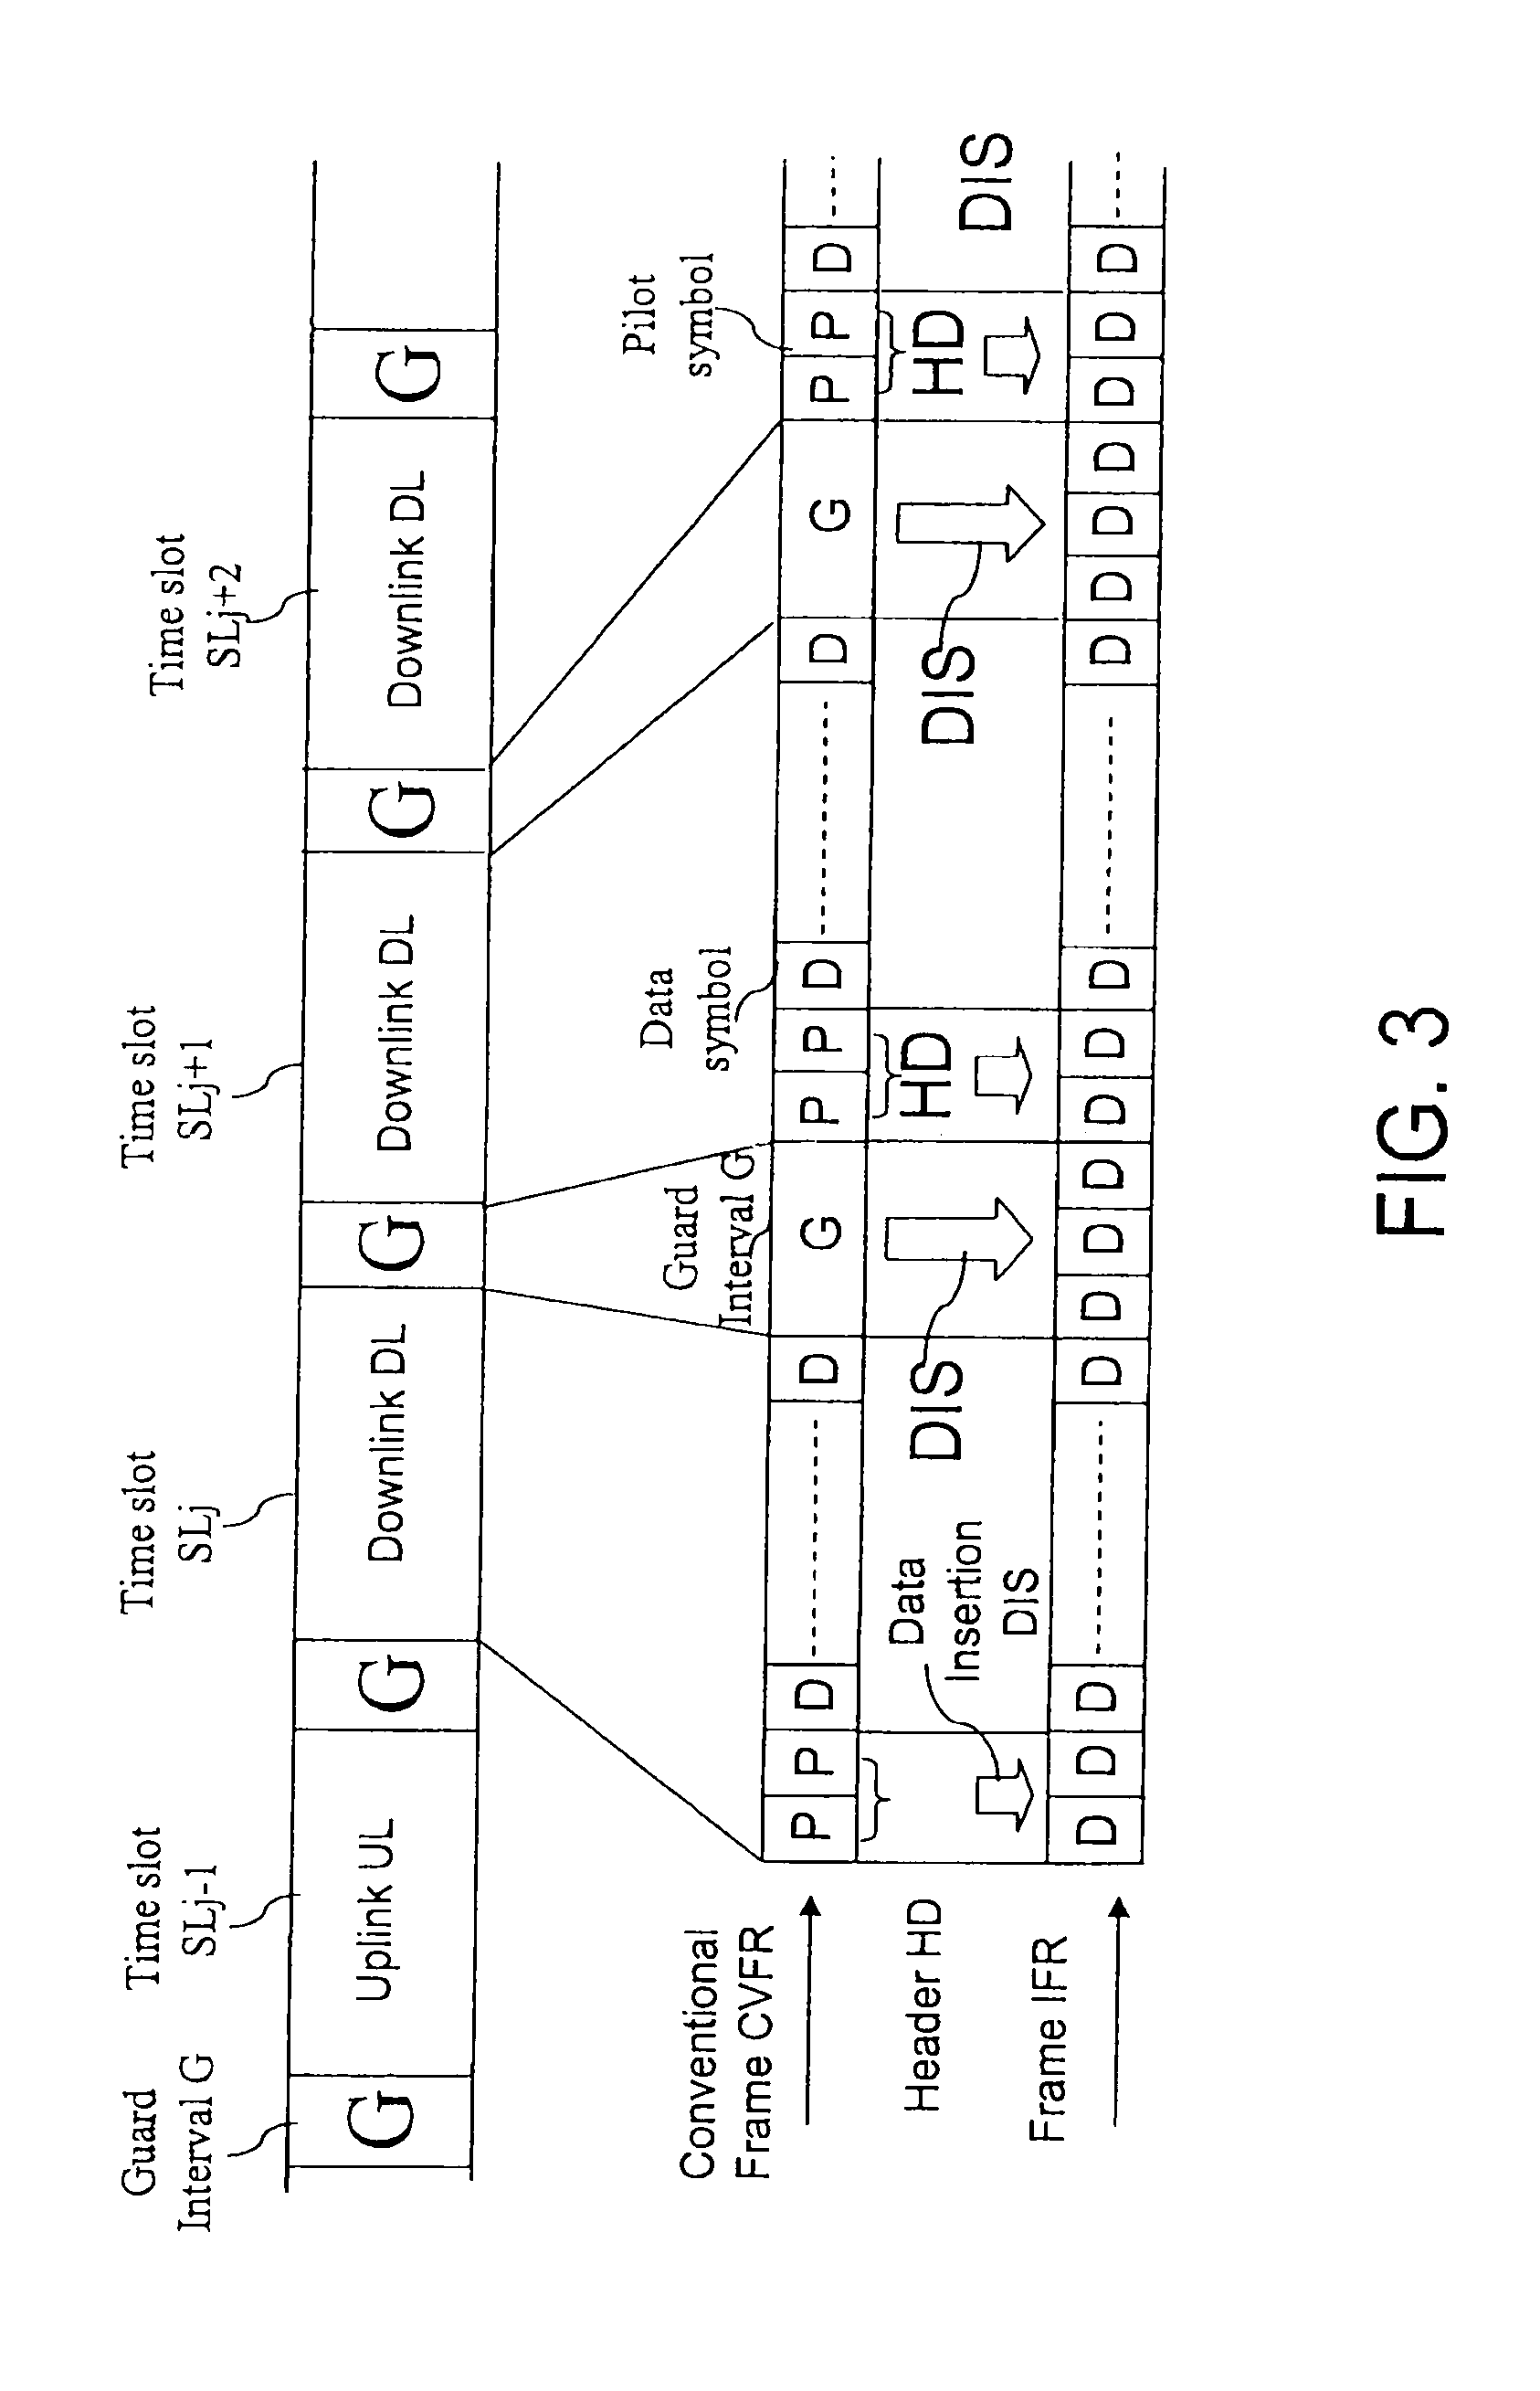 Method for transmitting TDD frames with increased data payload